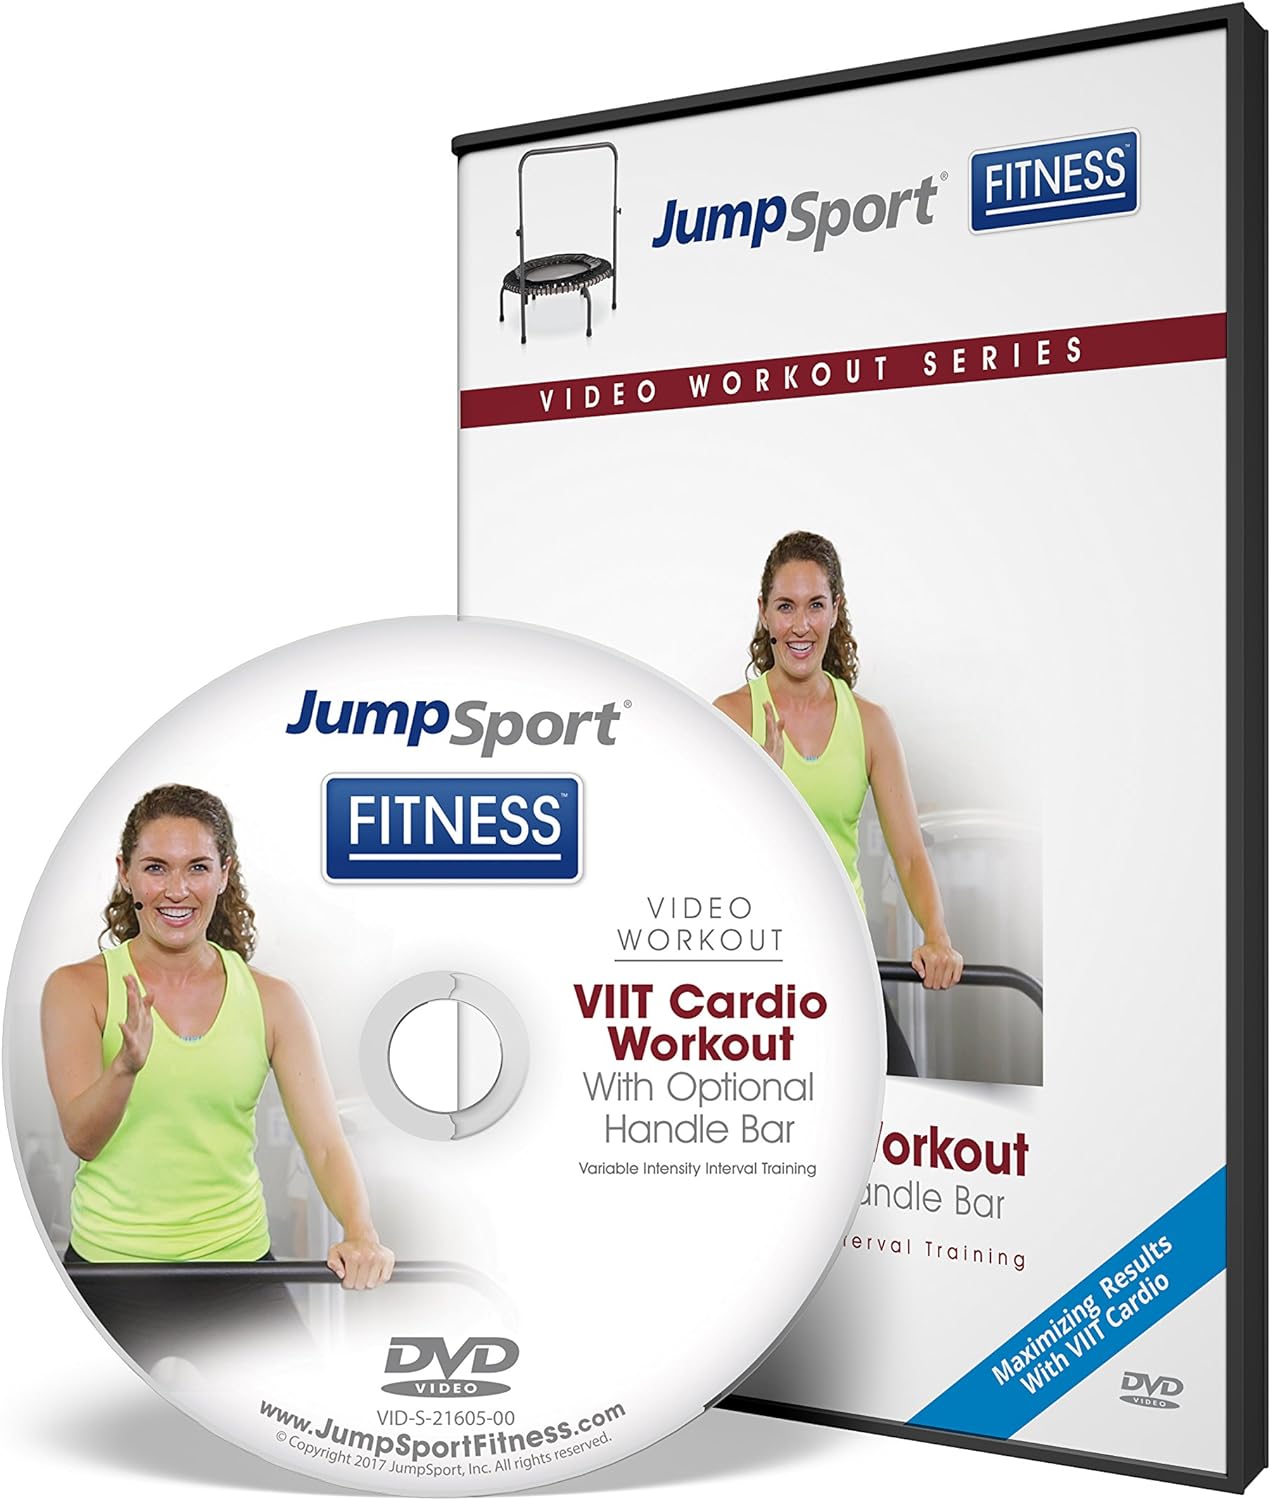 JumpSport Fitness Trampoline Workout DVDs | Cardio Focused | Resistance Bands and Handle Bar Options Available